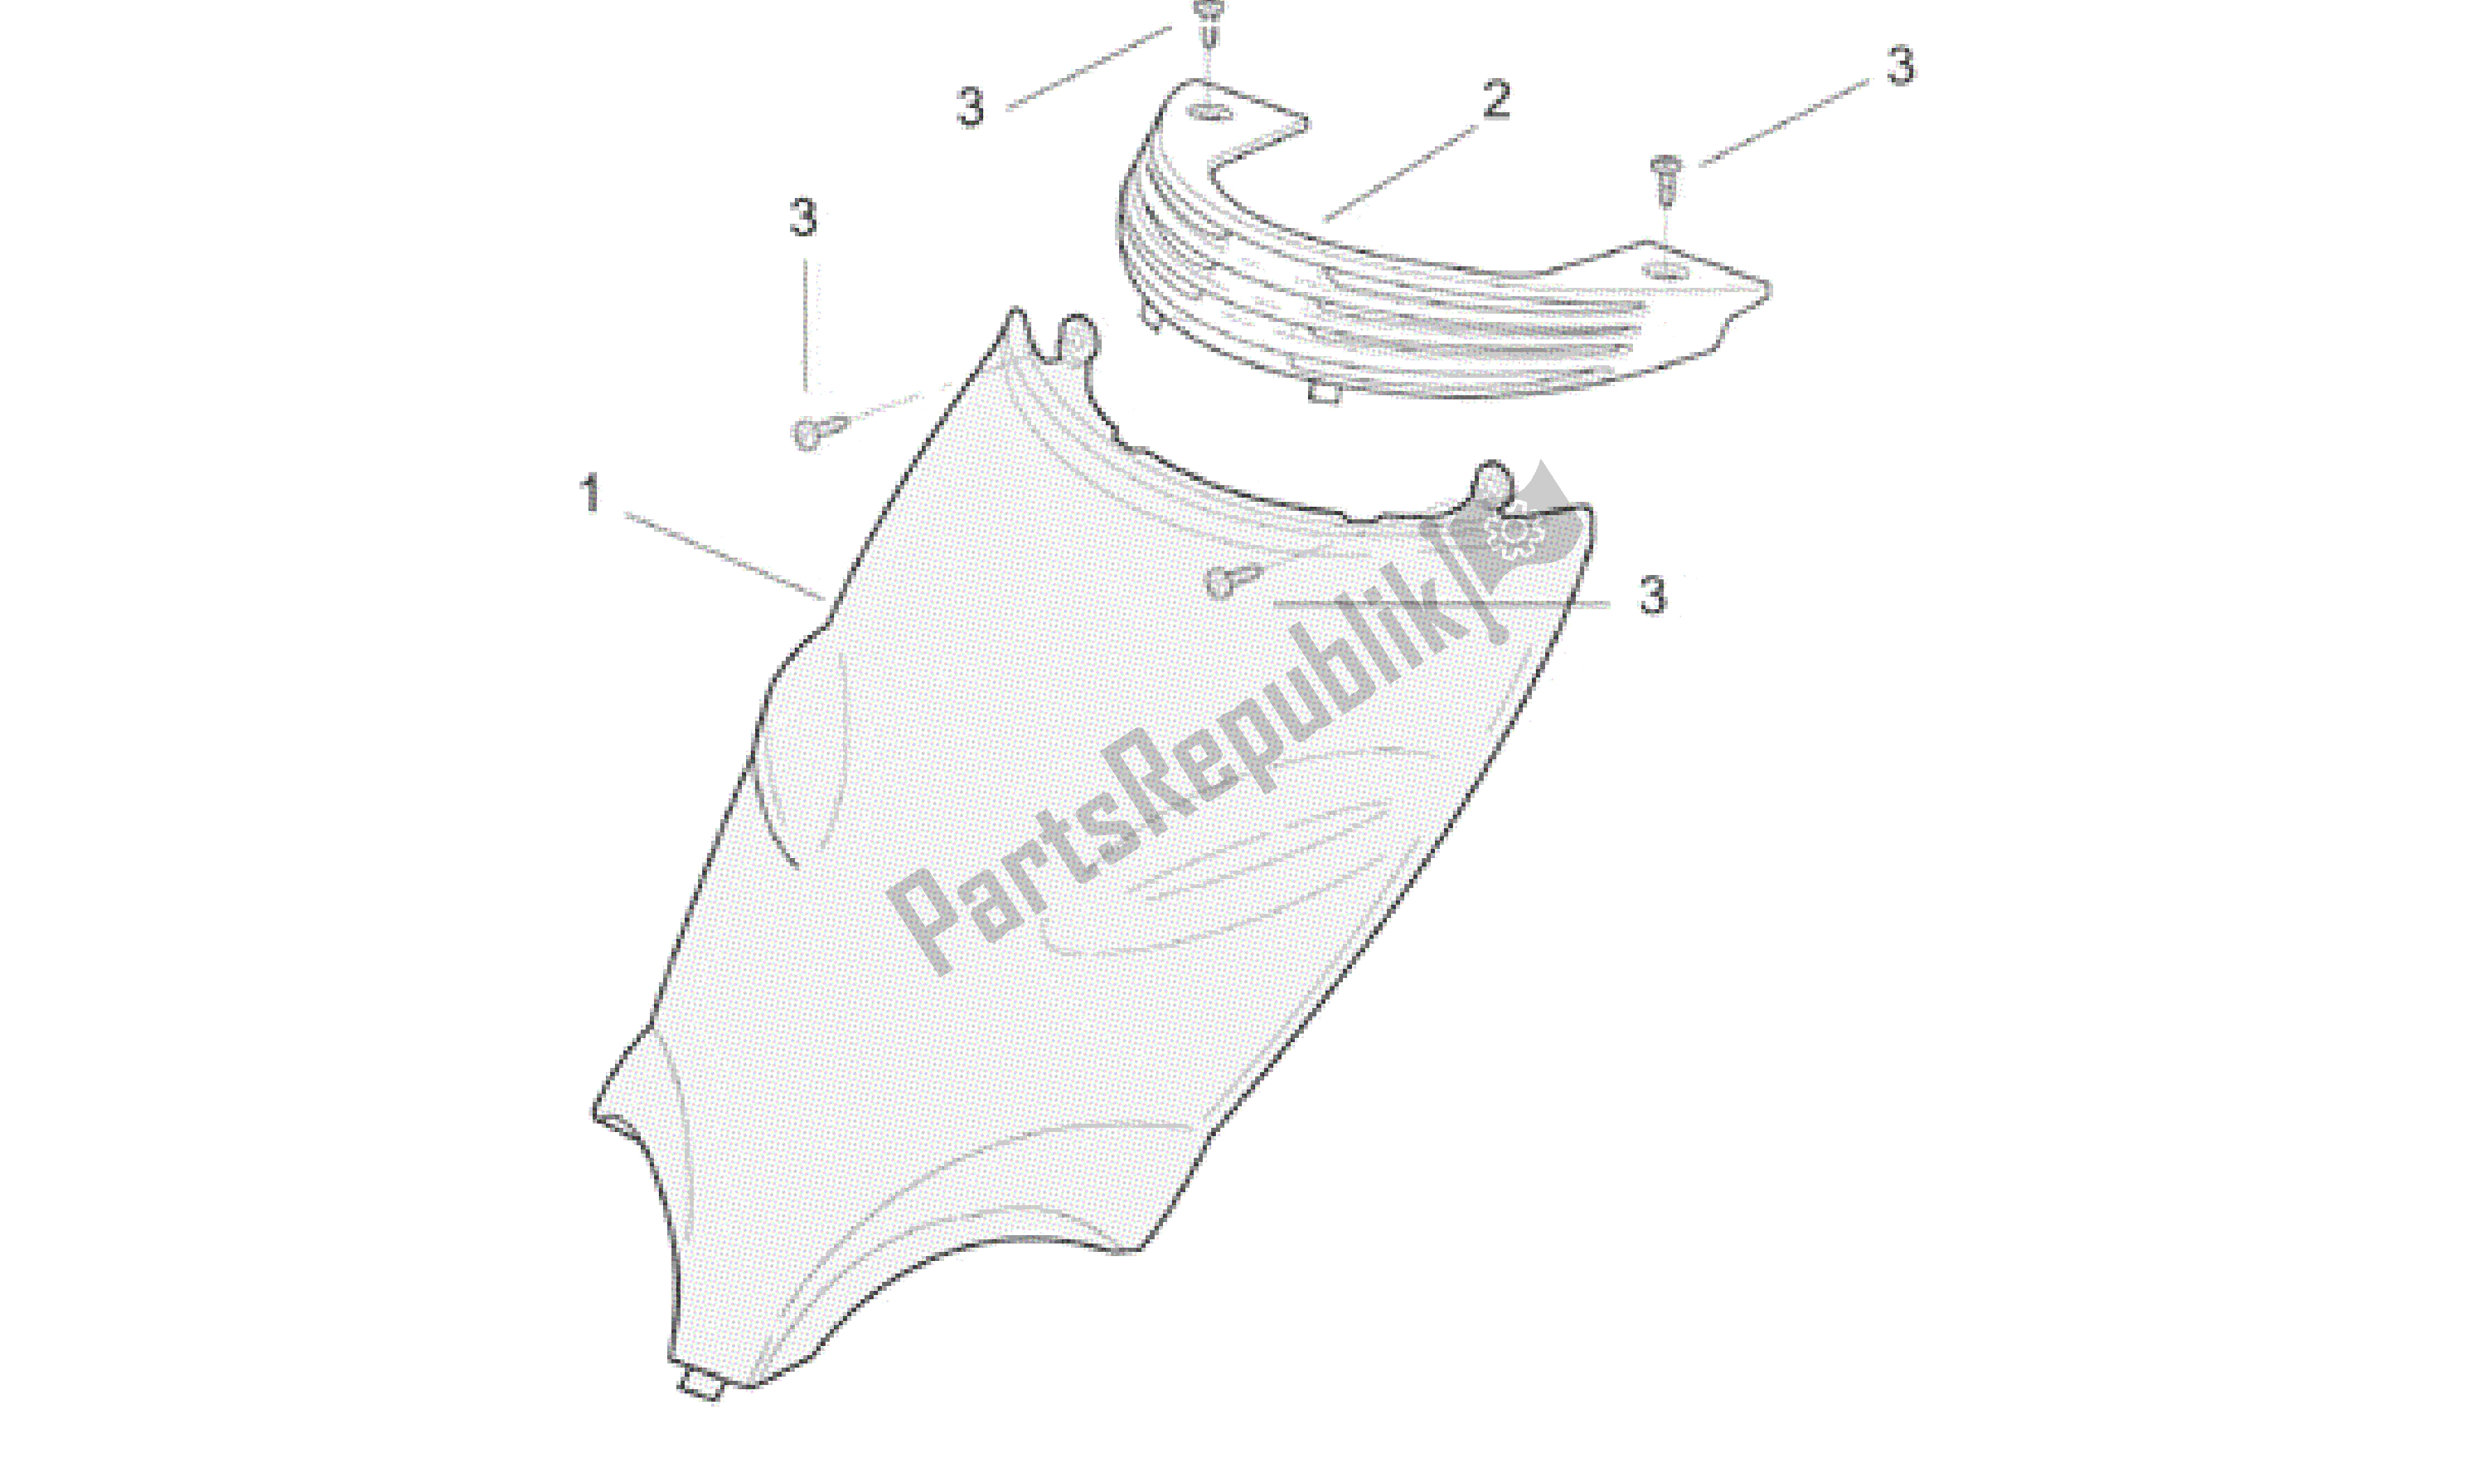 All parts for the Front Body - Front Fairing Ii of the Aprilia SR 125 1999 - 2001